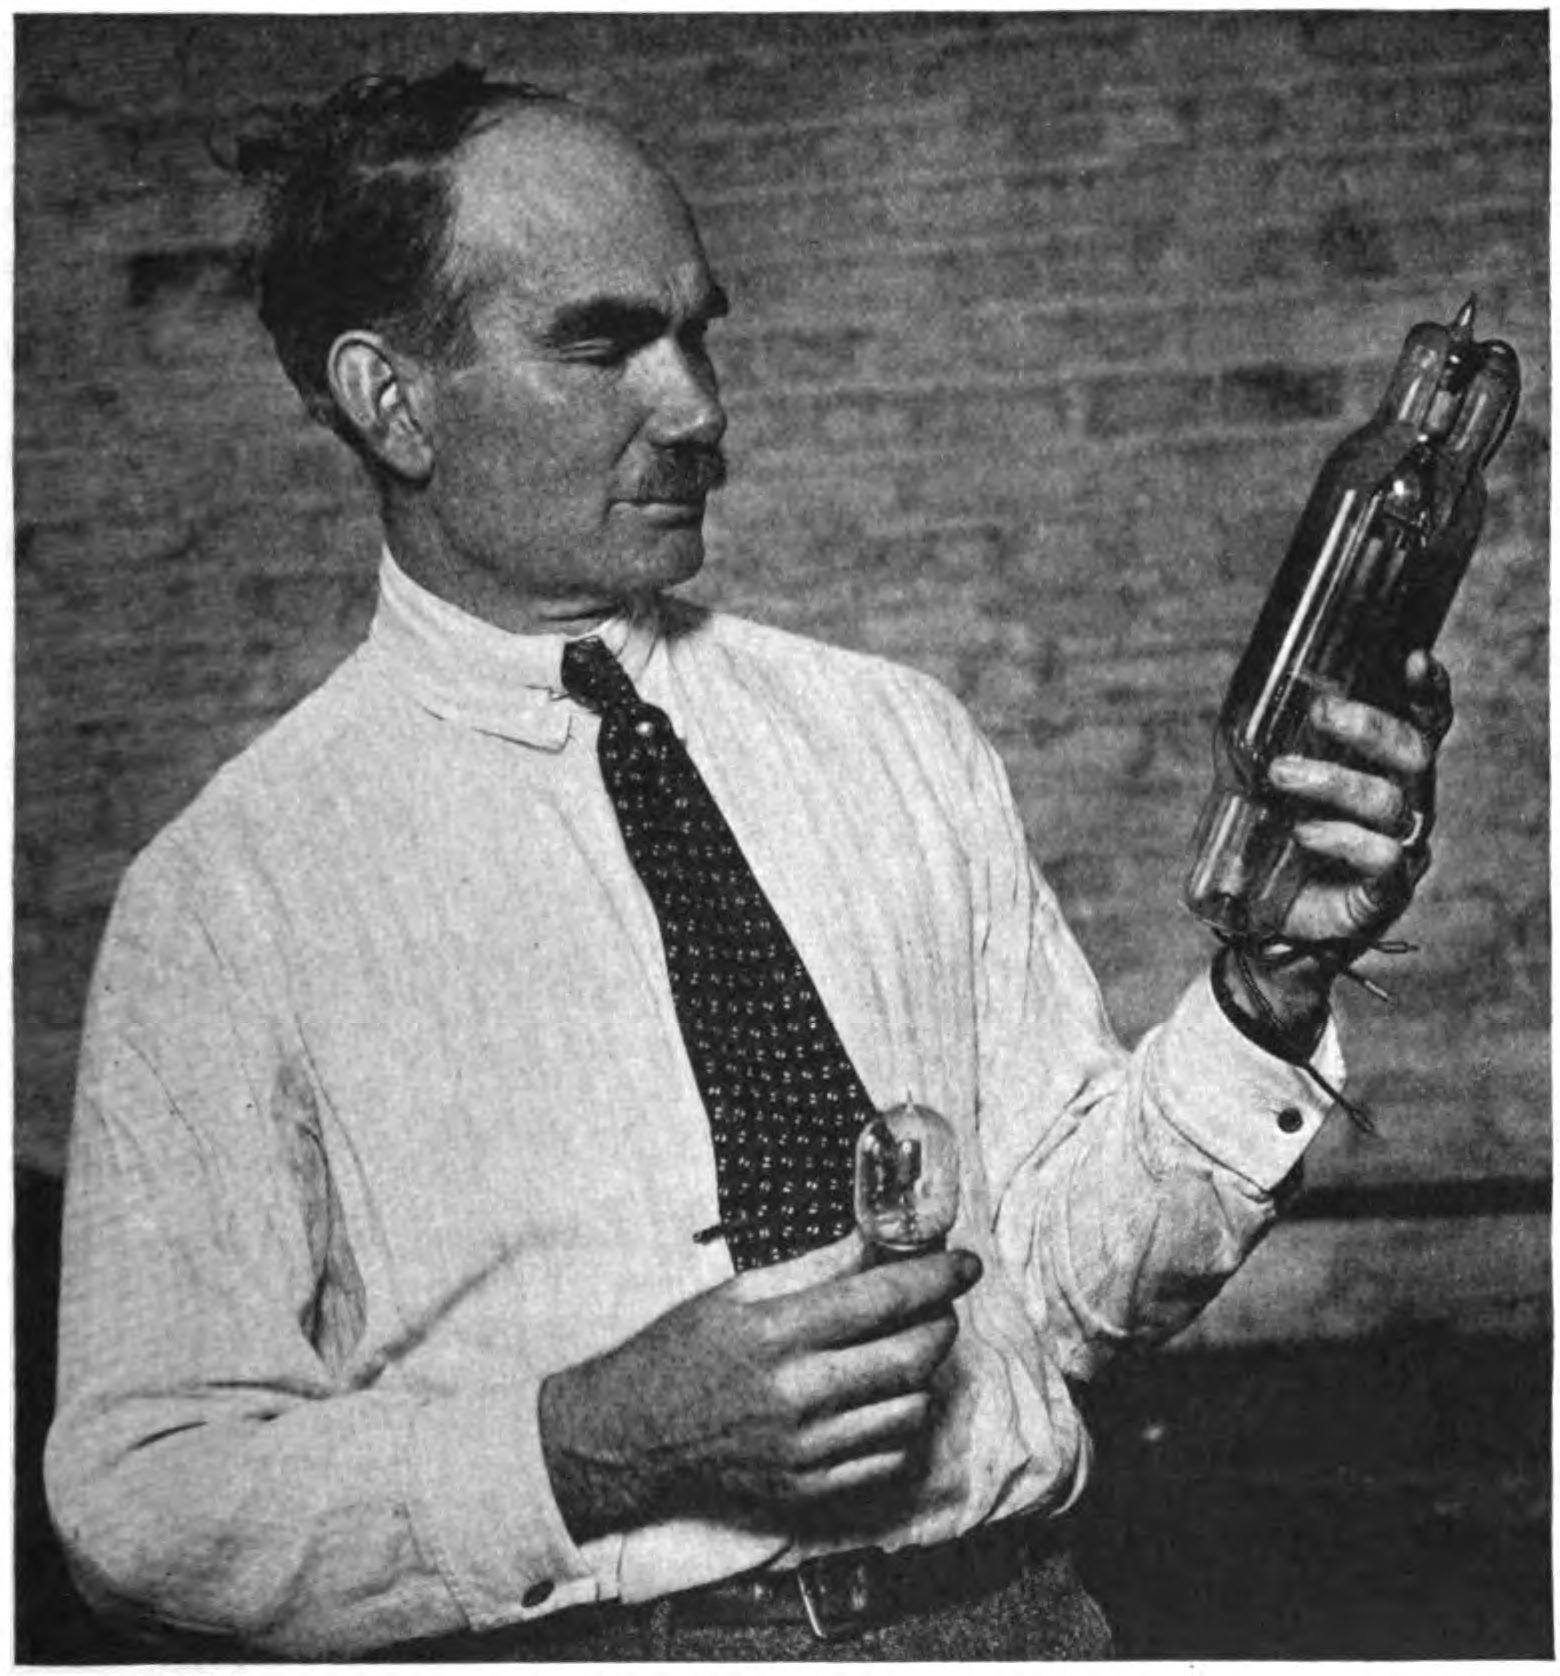 A black and white photo of Lee De Forest with holding an audion tube in each hand.